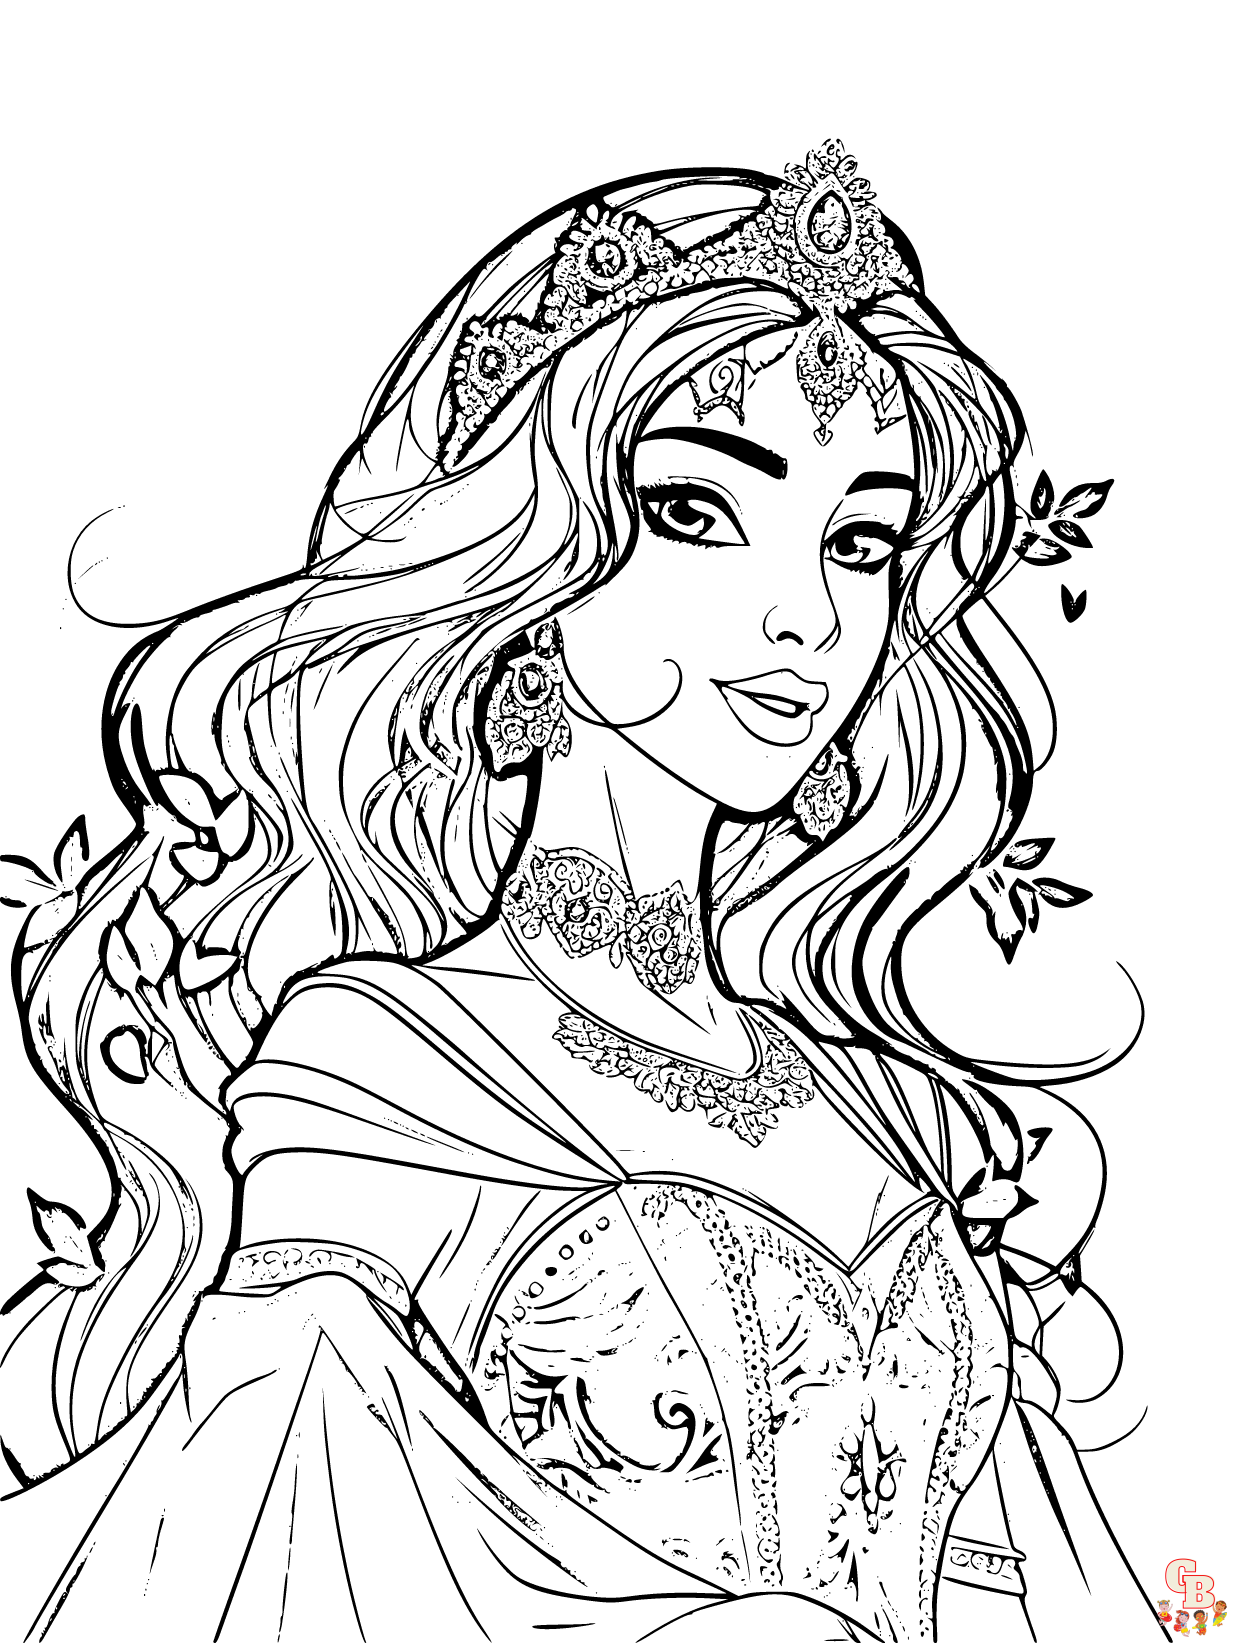 Jasmine coloring pages to print